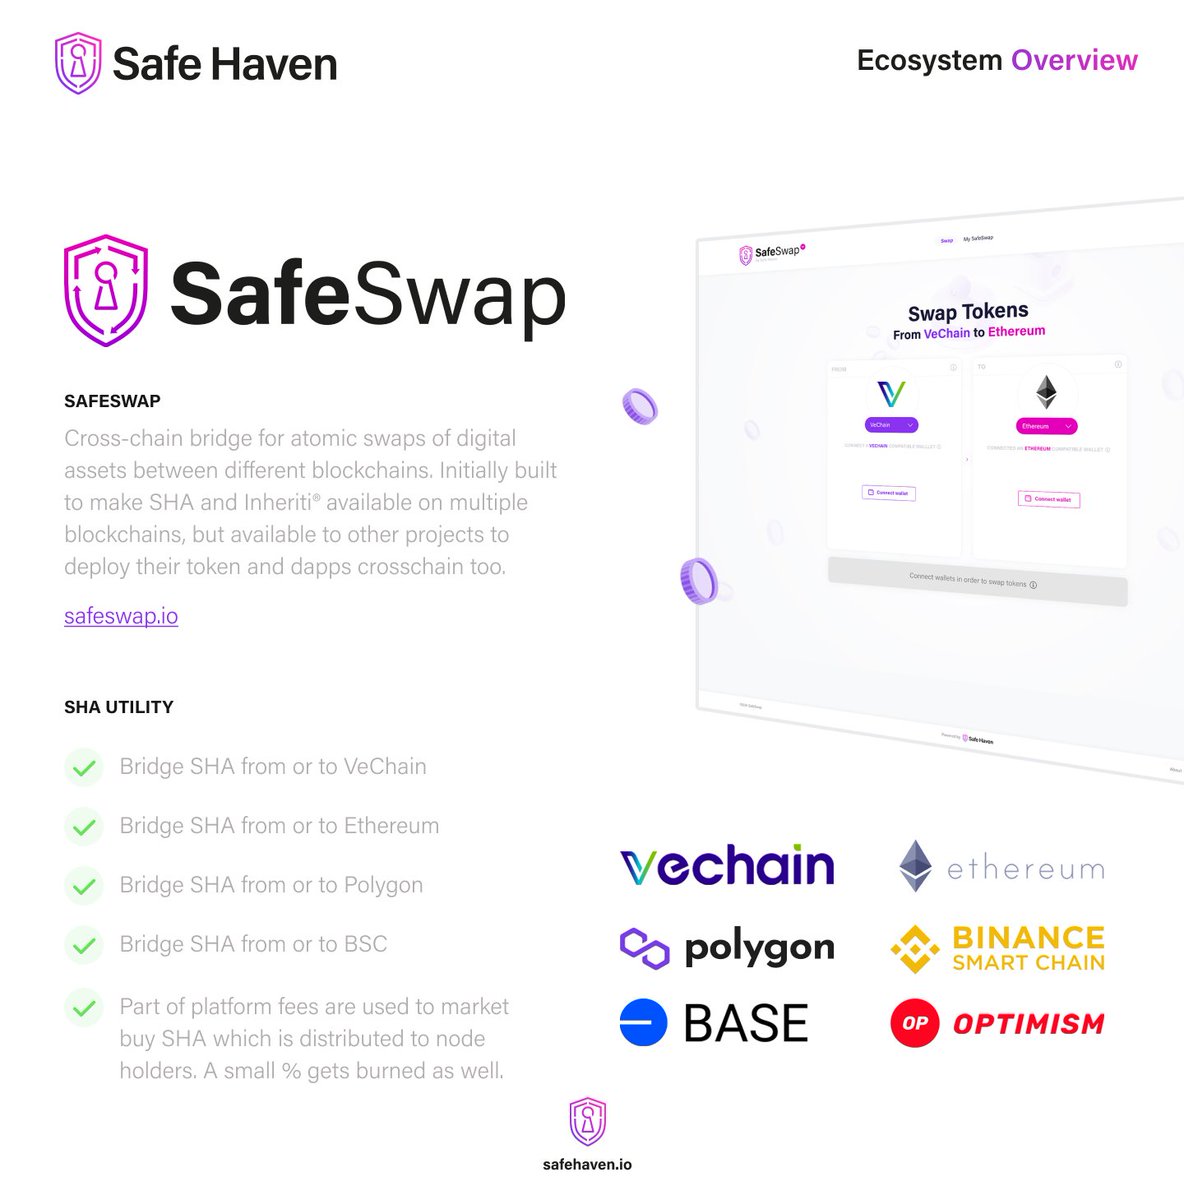 🌐Dive into the world of #DeFi with #SafeHaven's #SafeSwap, enabling secure and seamless transfers of native tokens across different blockchains. Start swapping now!🔄 safeswap.io $SHA #Blockchain